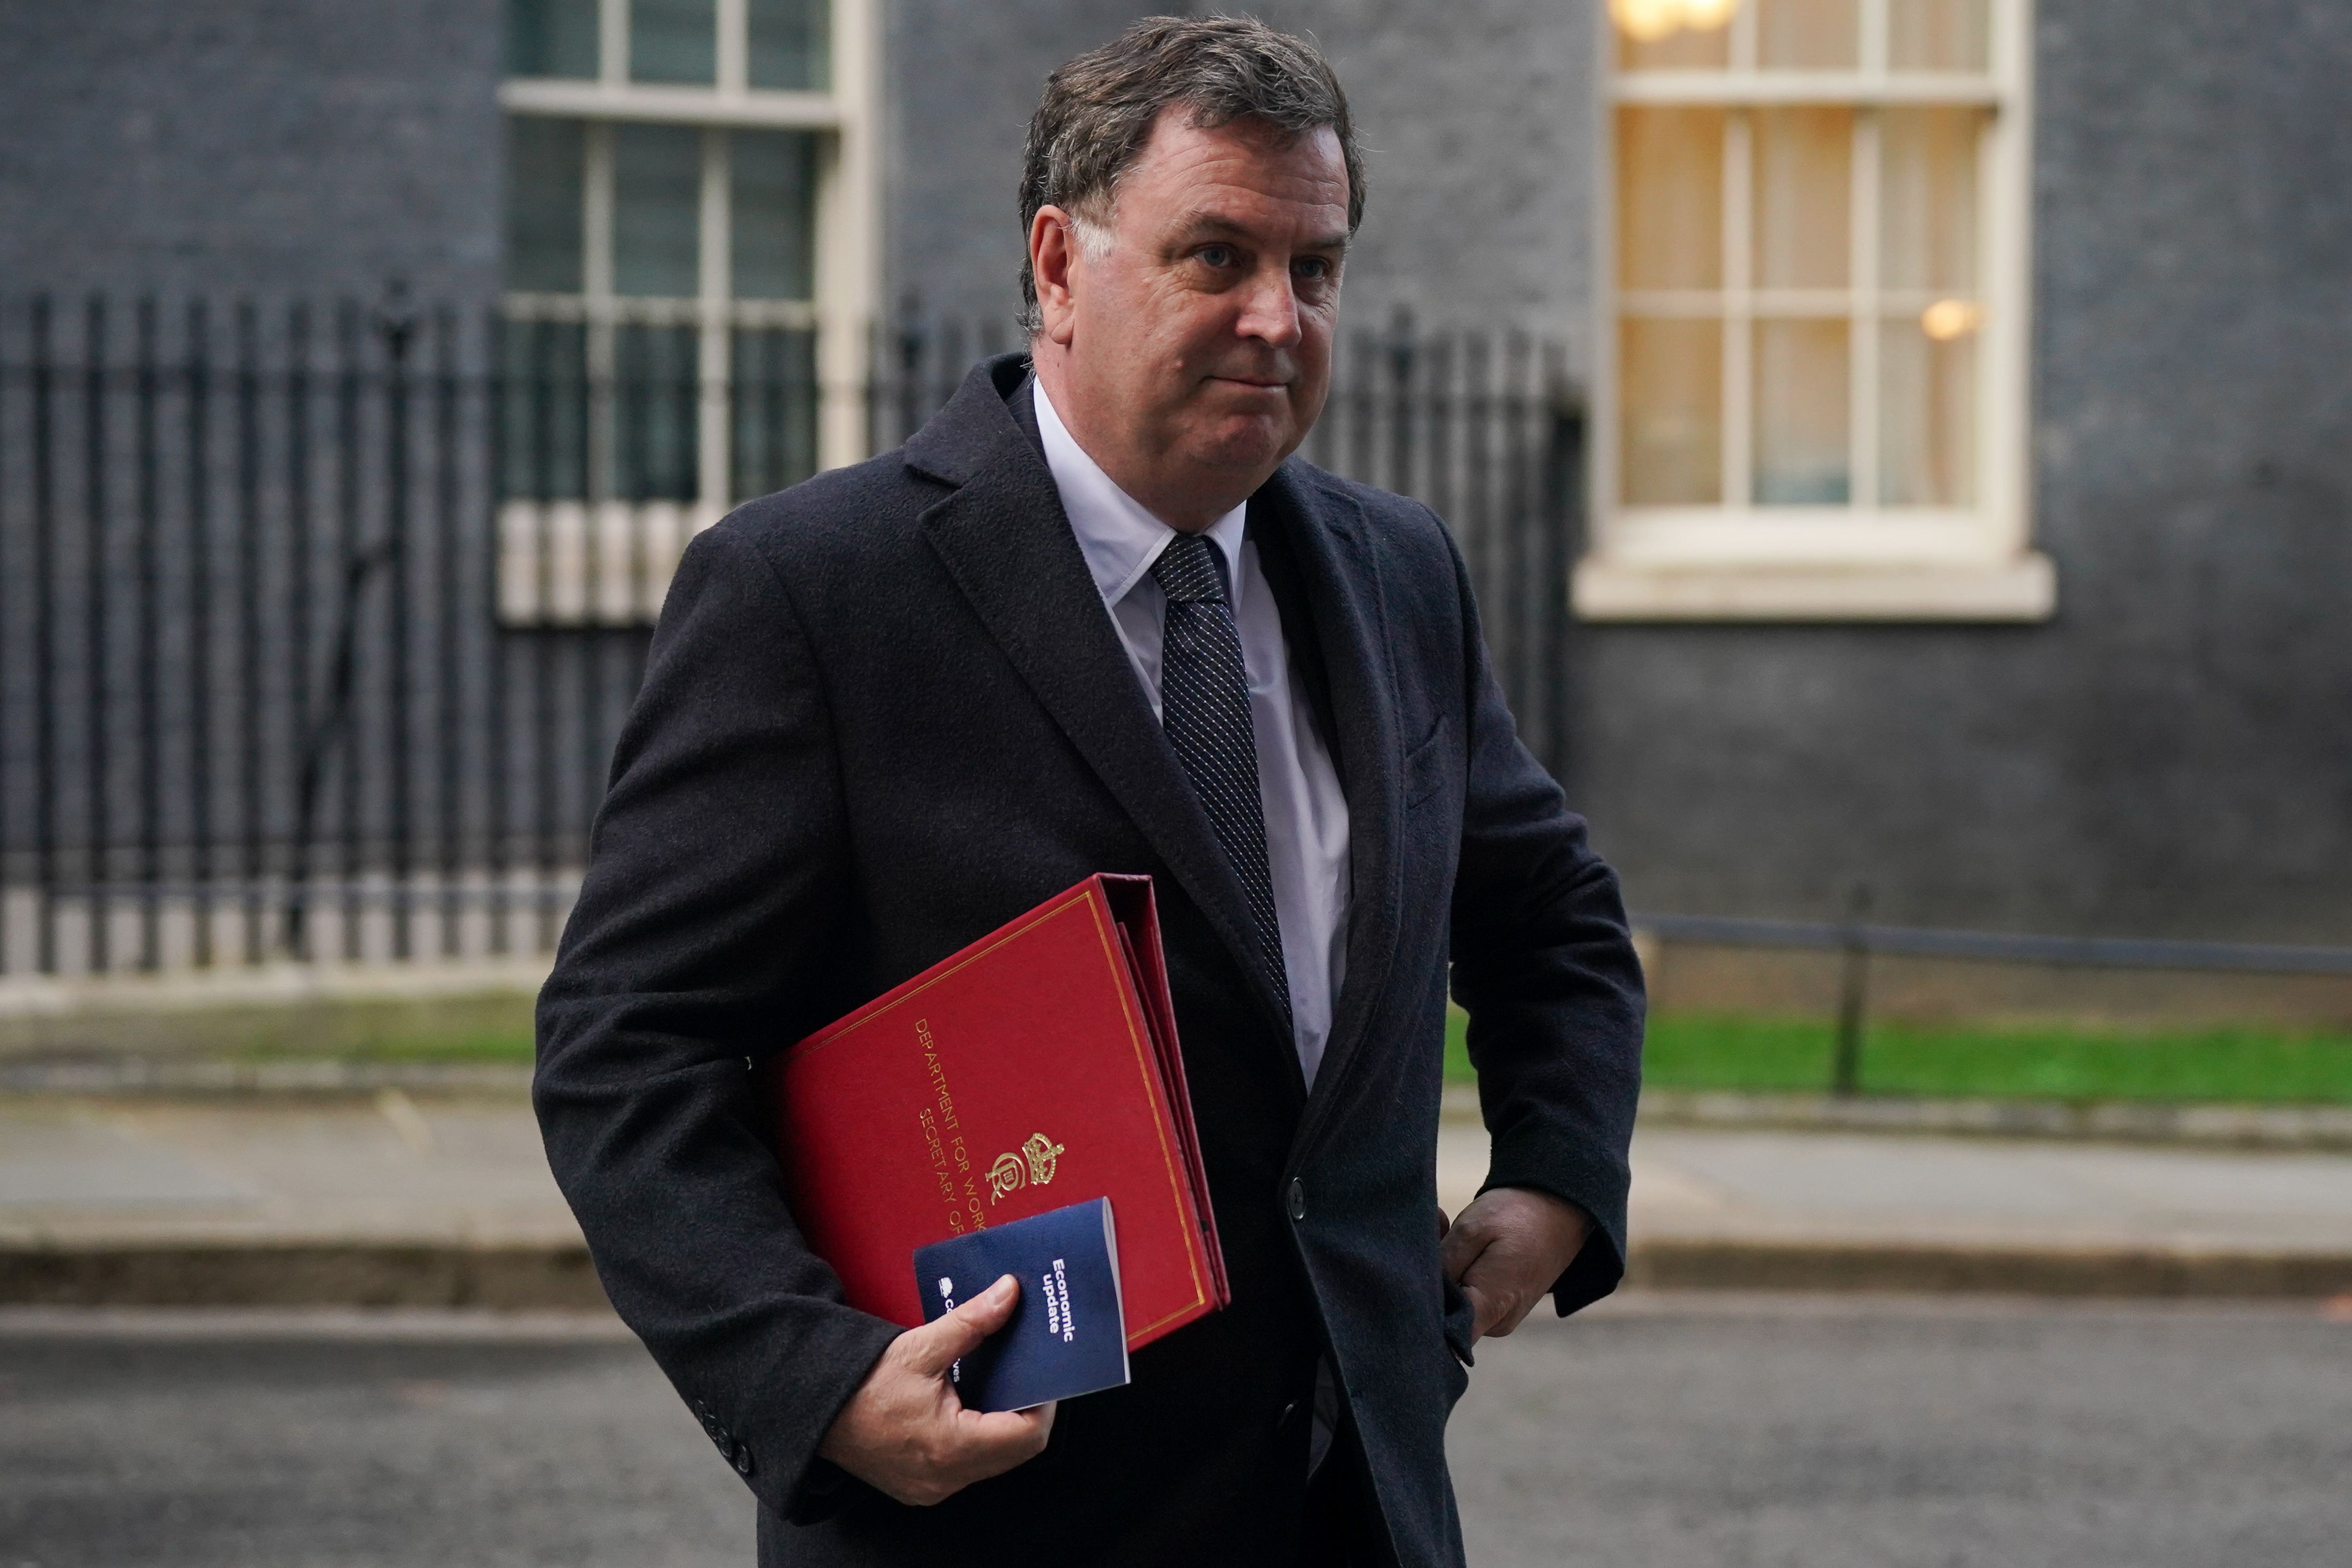 The work and pensions secretary Mel Stride said getting back to work is ‘good for mental health’